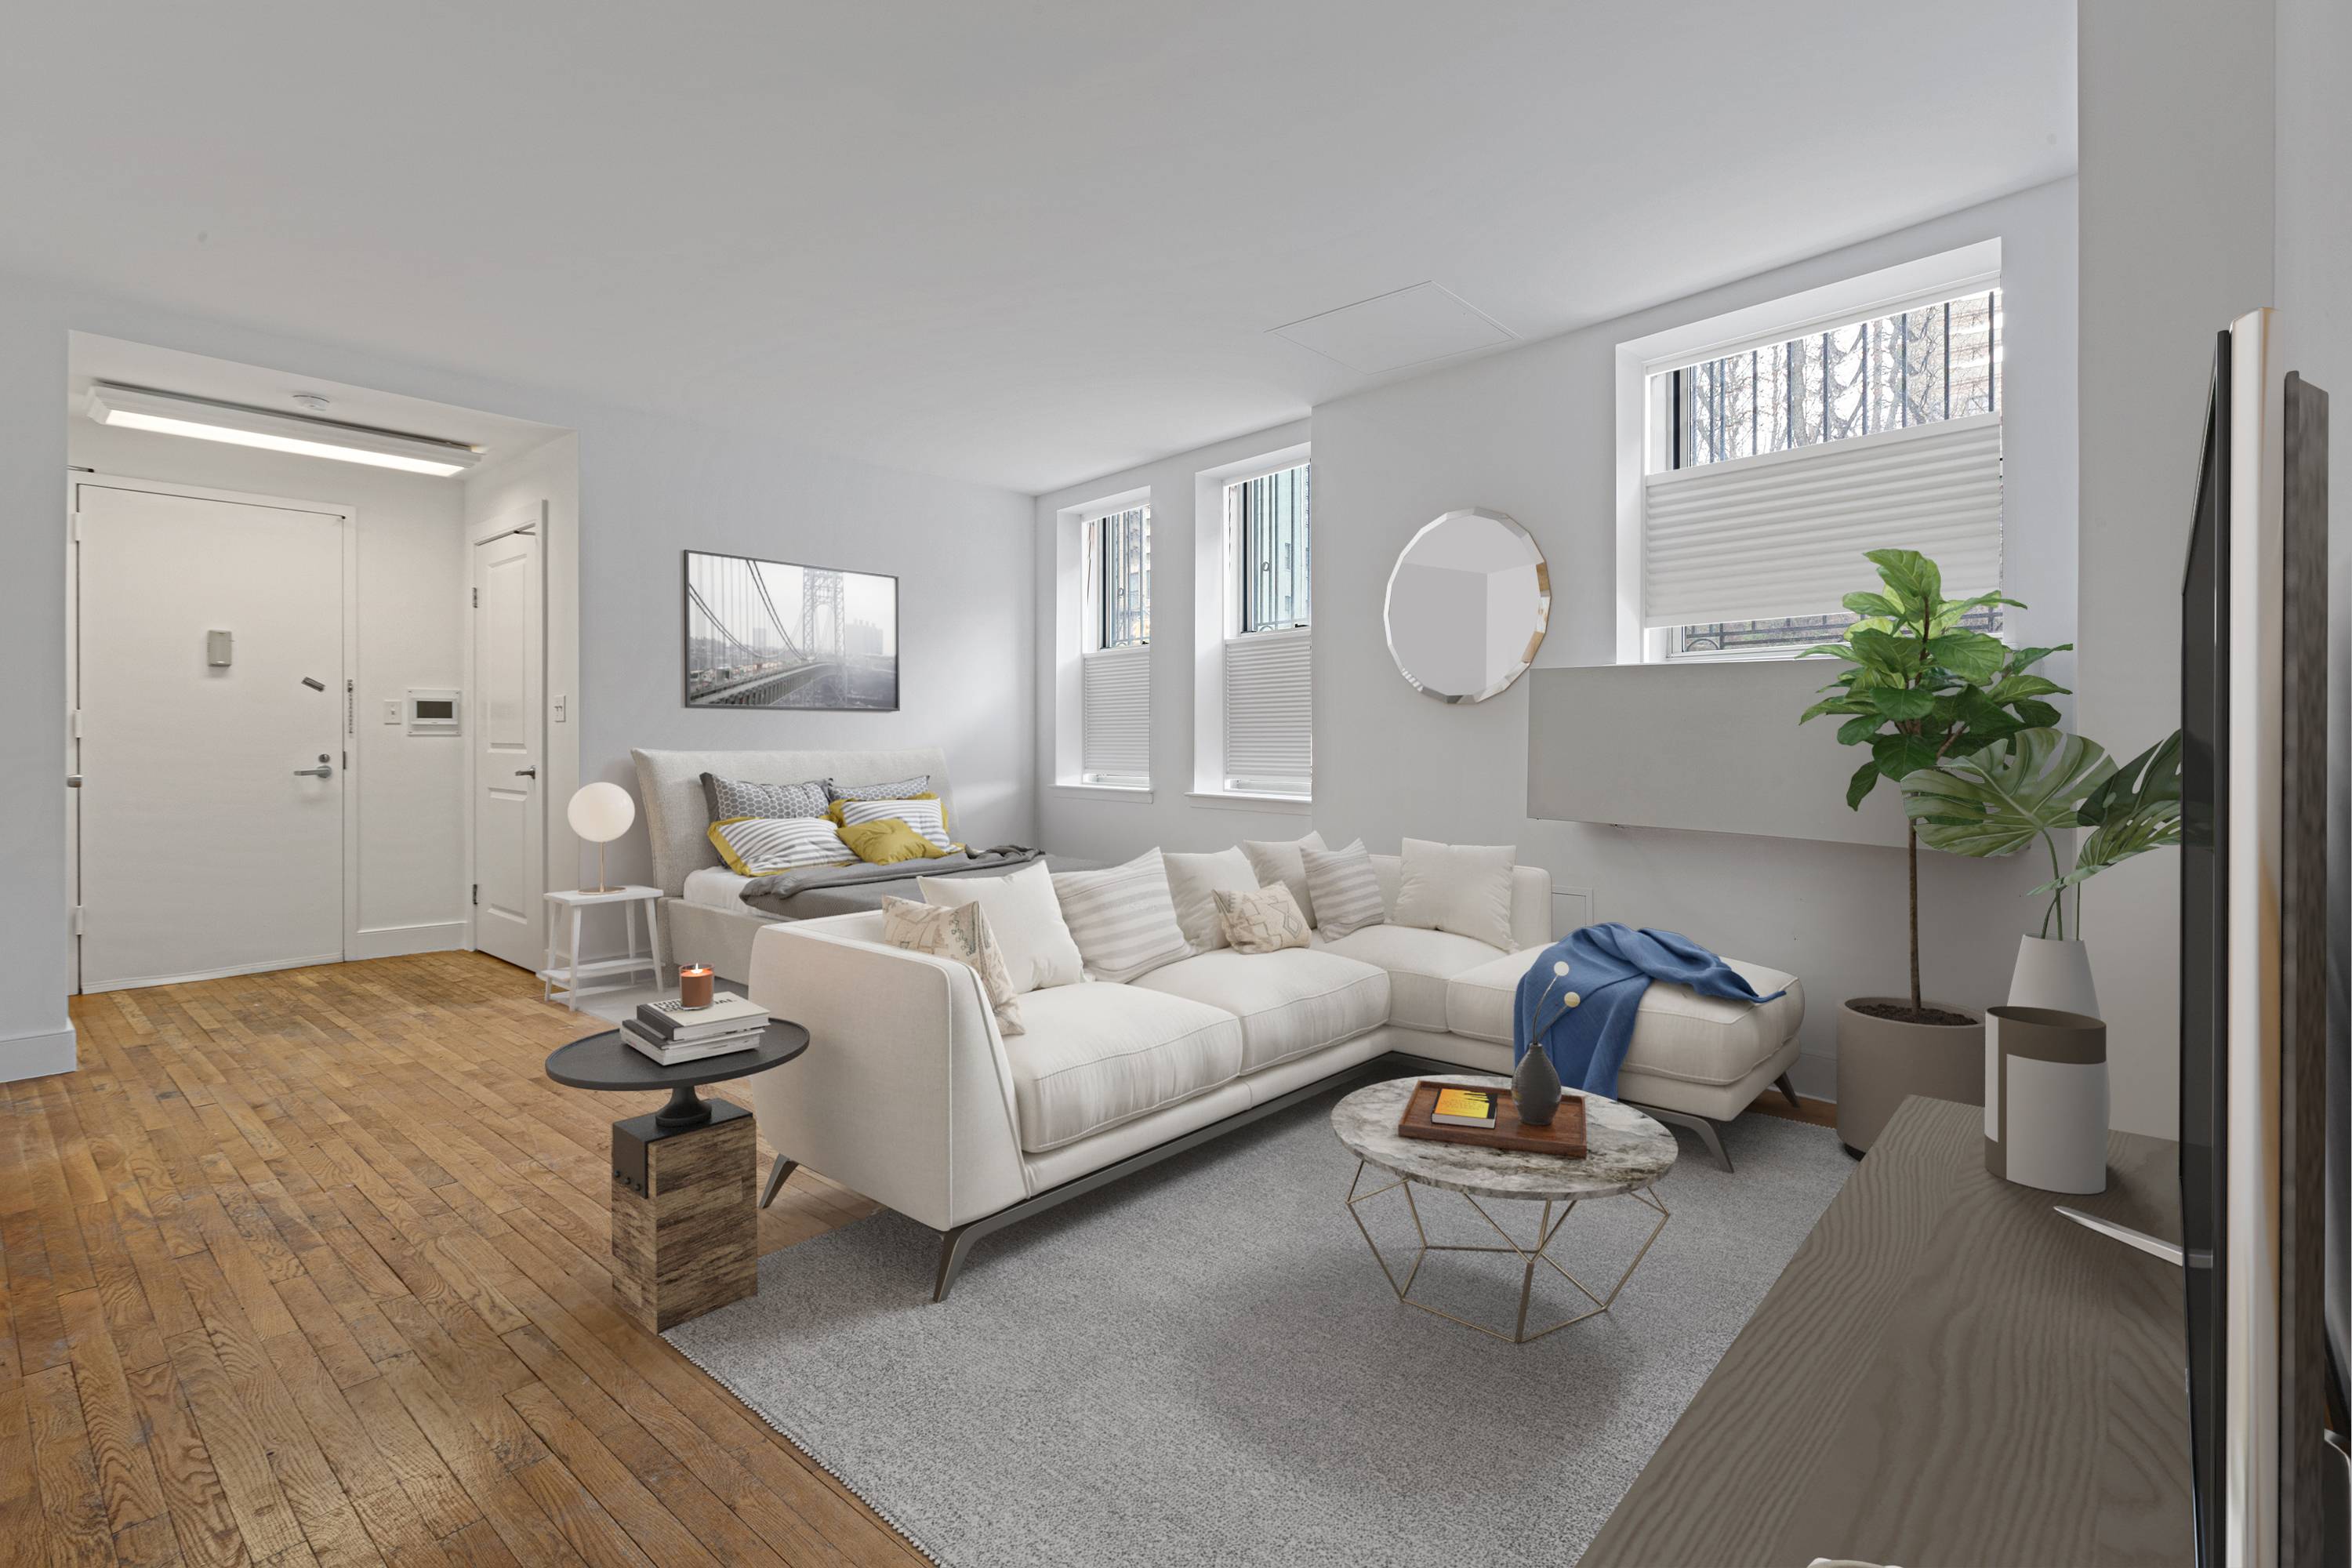 Welcome home to Parkside Flats, a boutique condominium located in prime Central Harlem, just across from St.